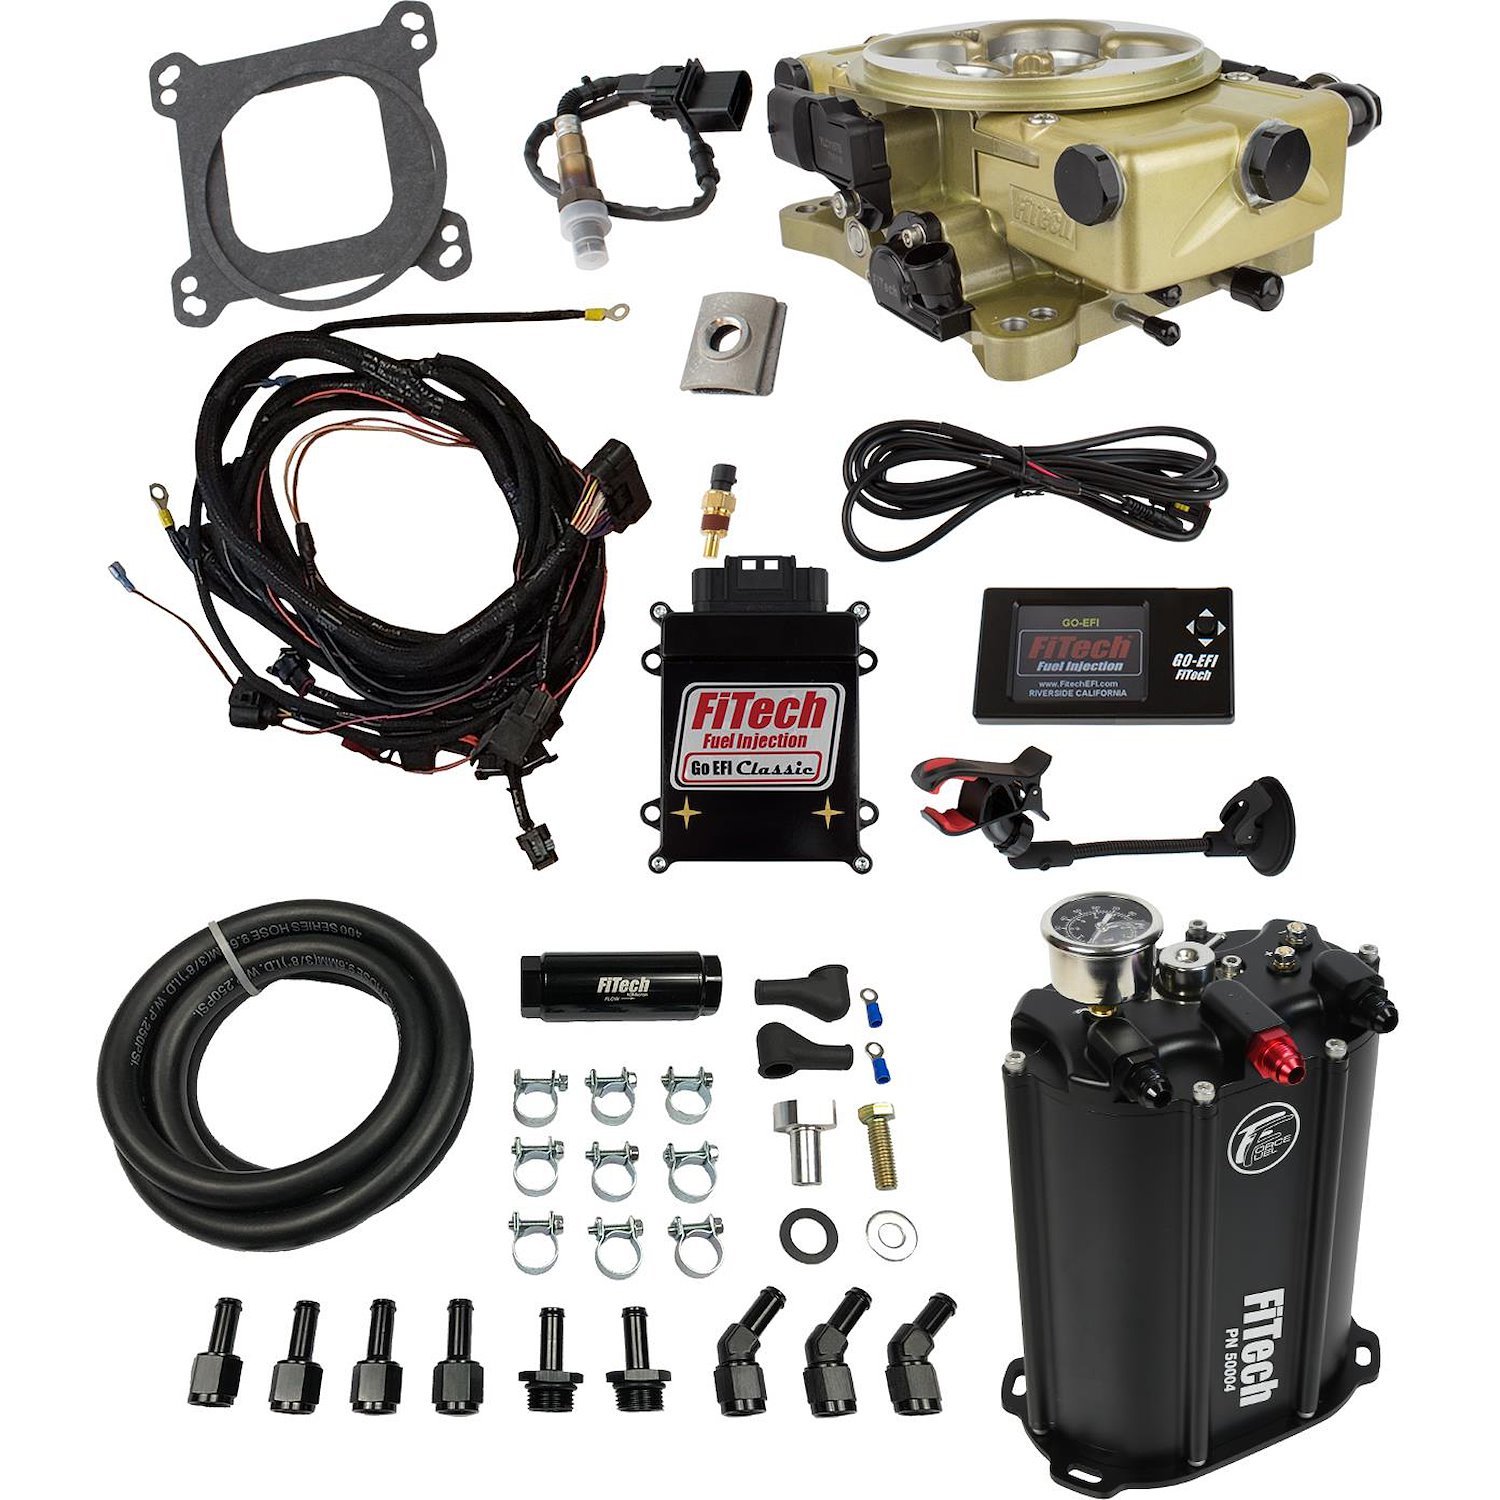 Go EFI Classic 650 HP Throttle Body System Master Kit with Force Fuel System